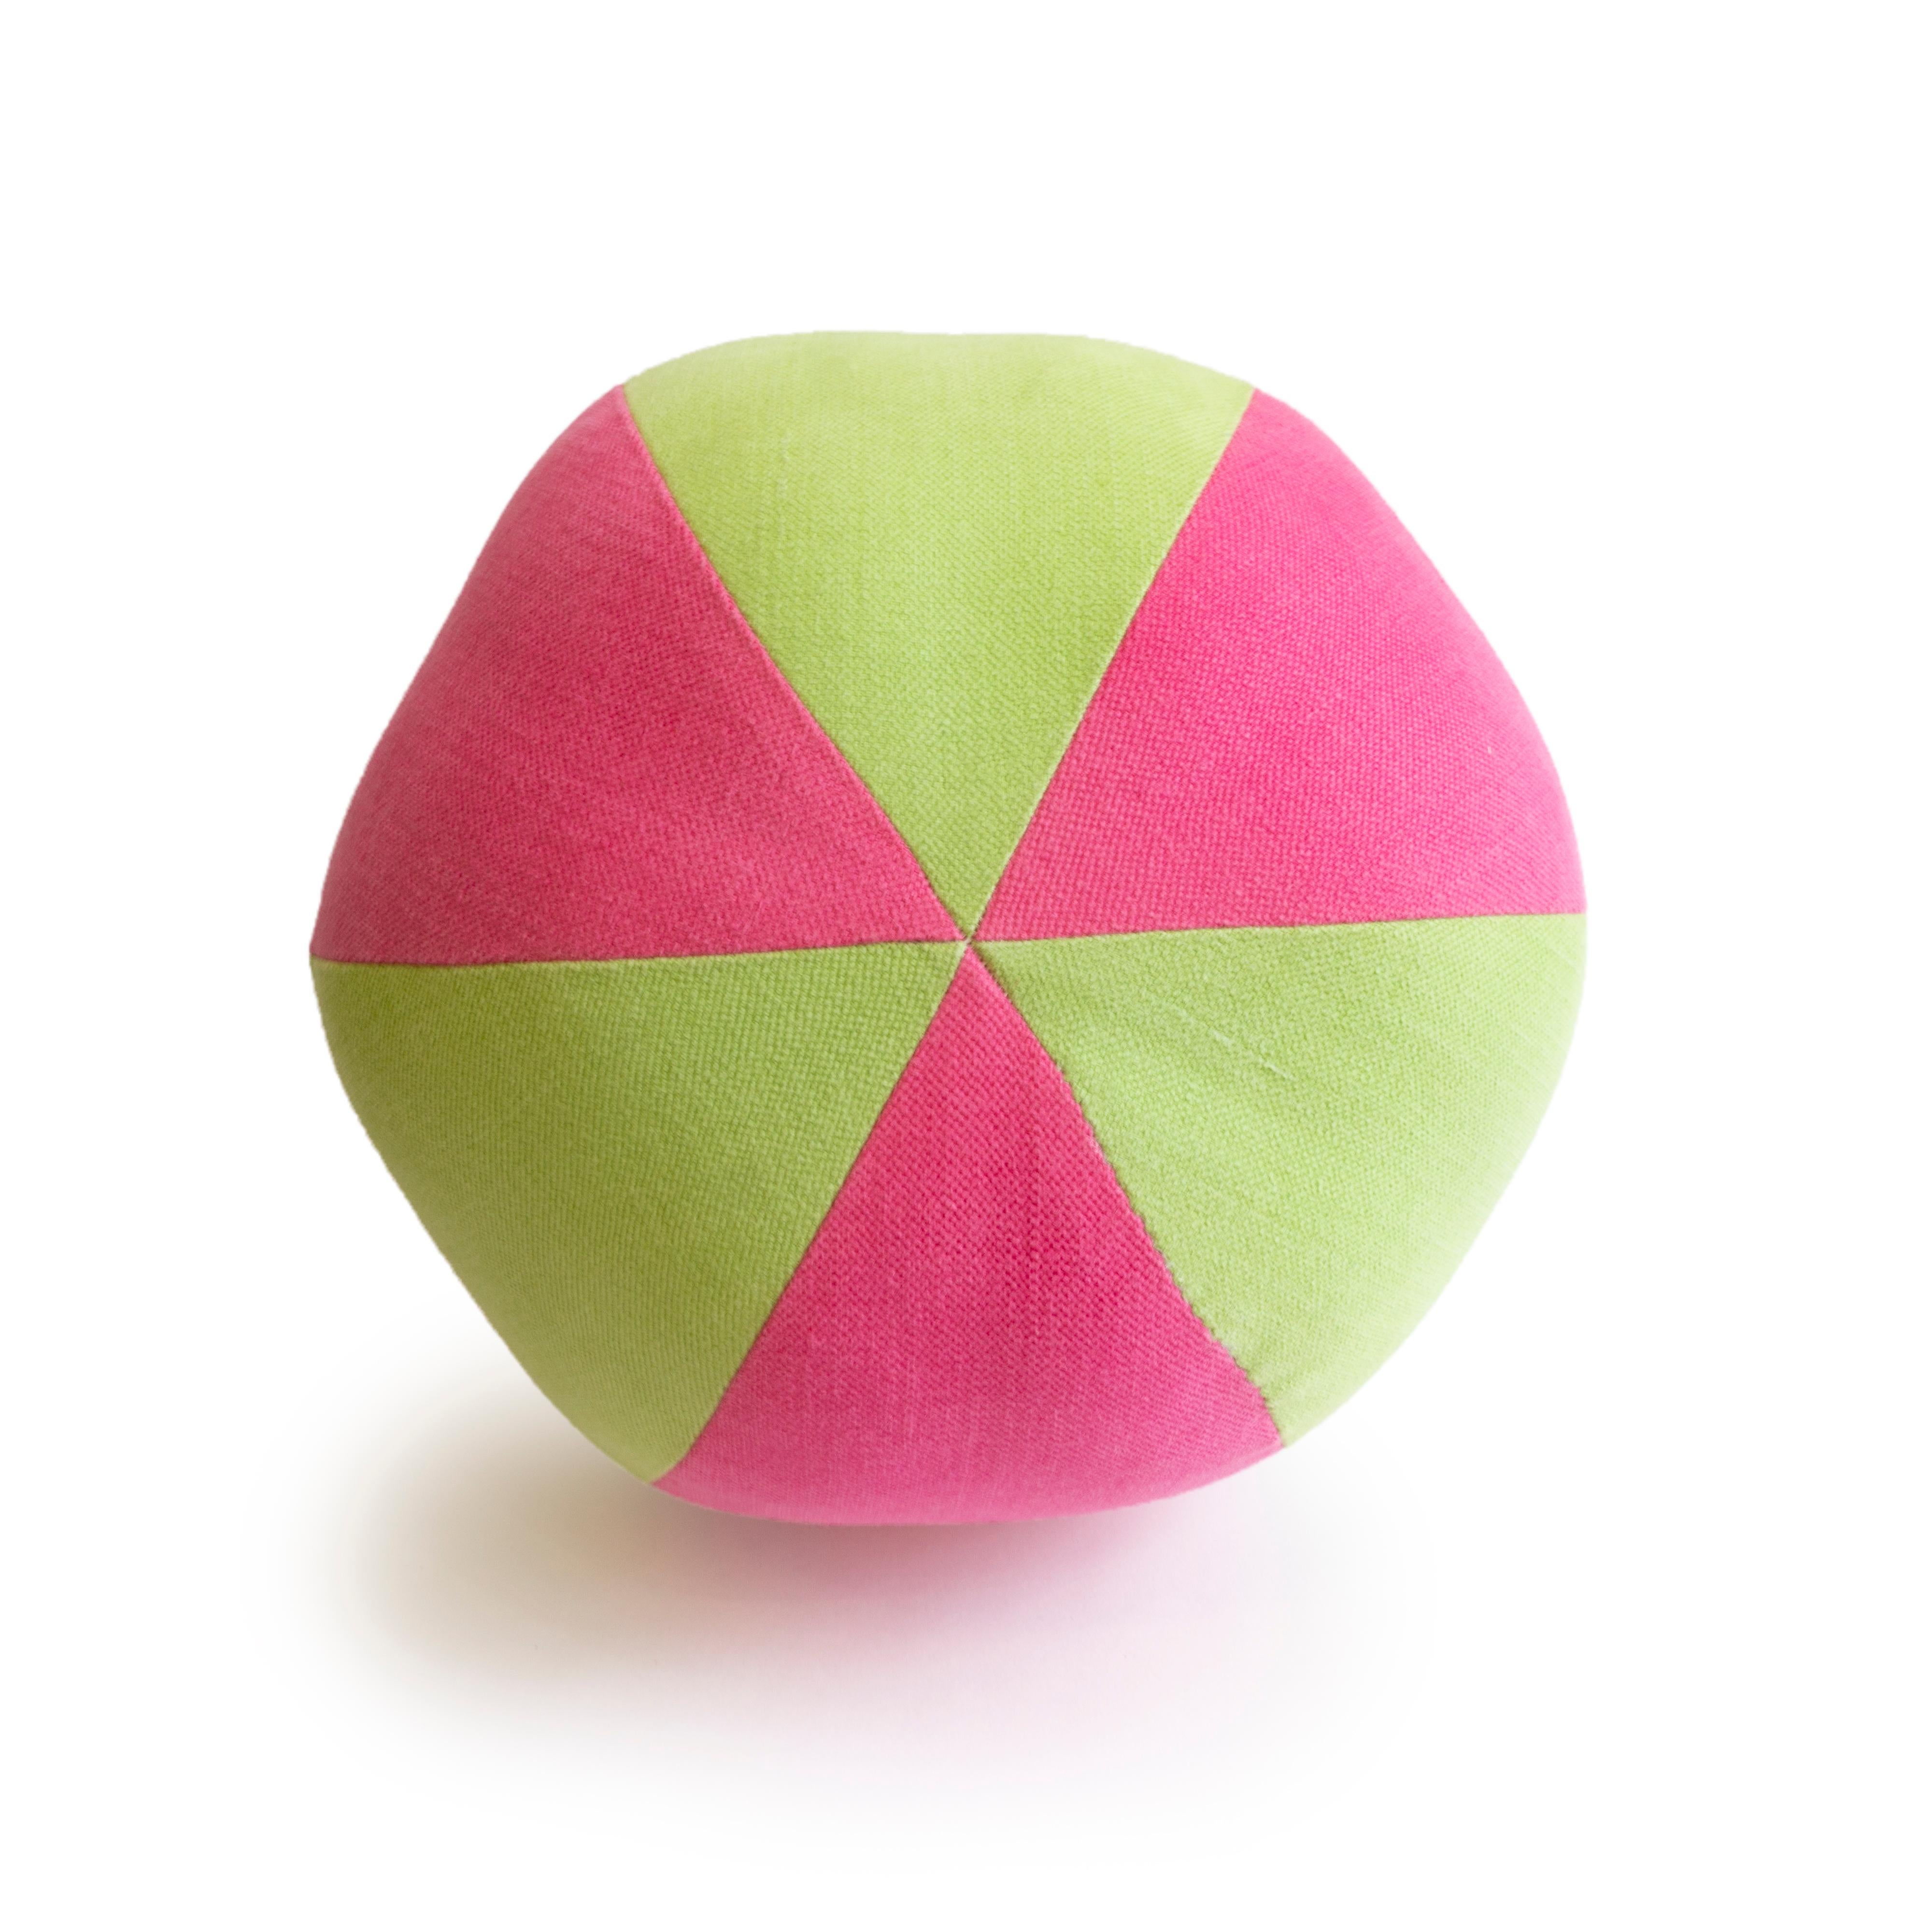 Our handmade round ball throw pillow is sewn in a pink and green fabric resembling a beach ball. All of our pillows are hand sewn at our studio in Norwalk, Connecticut.

Measurements: 9